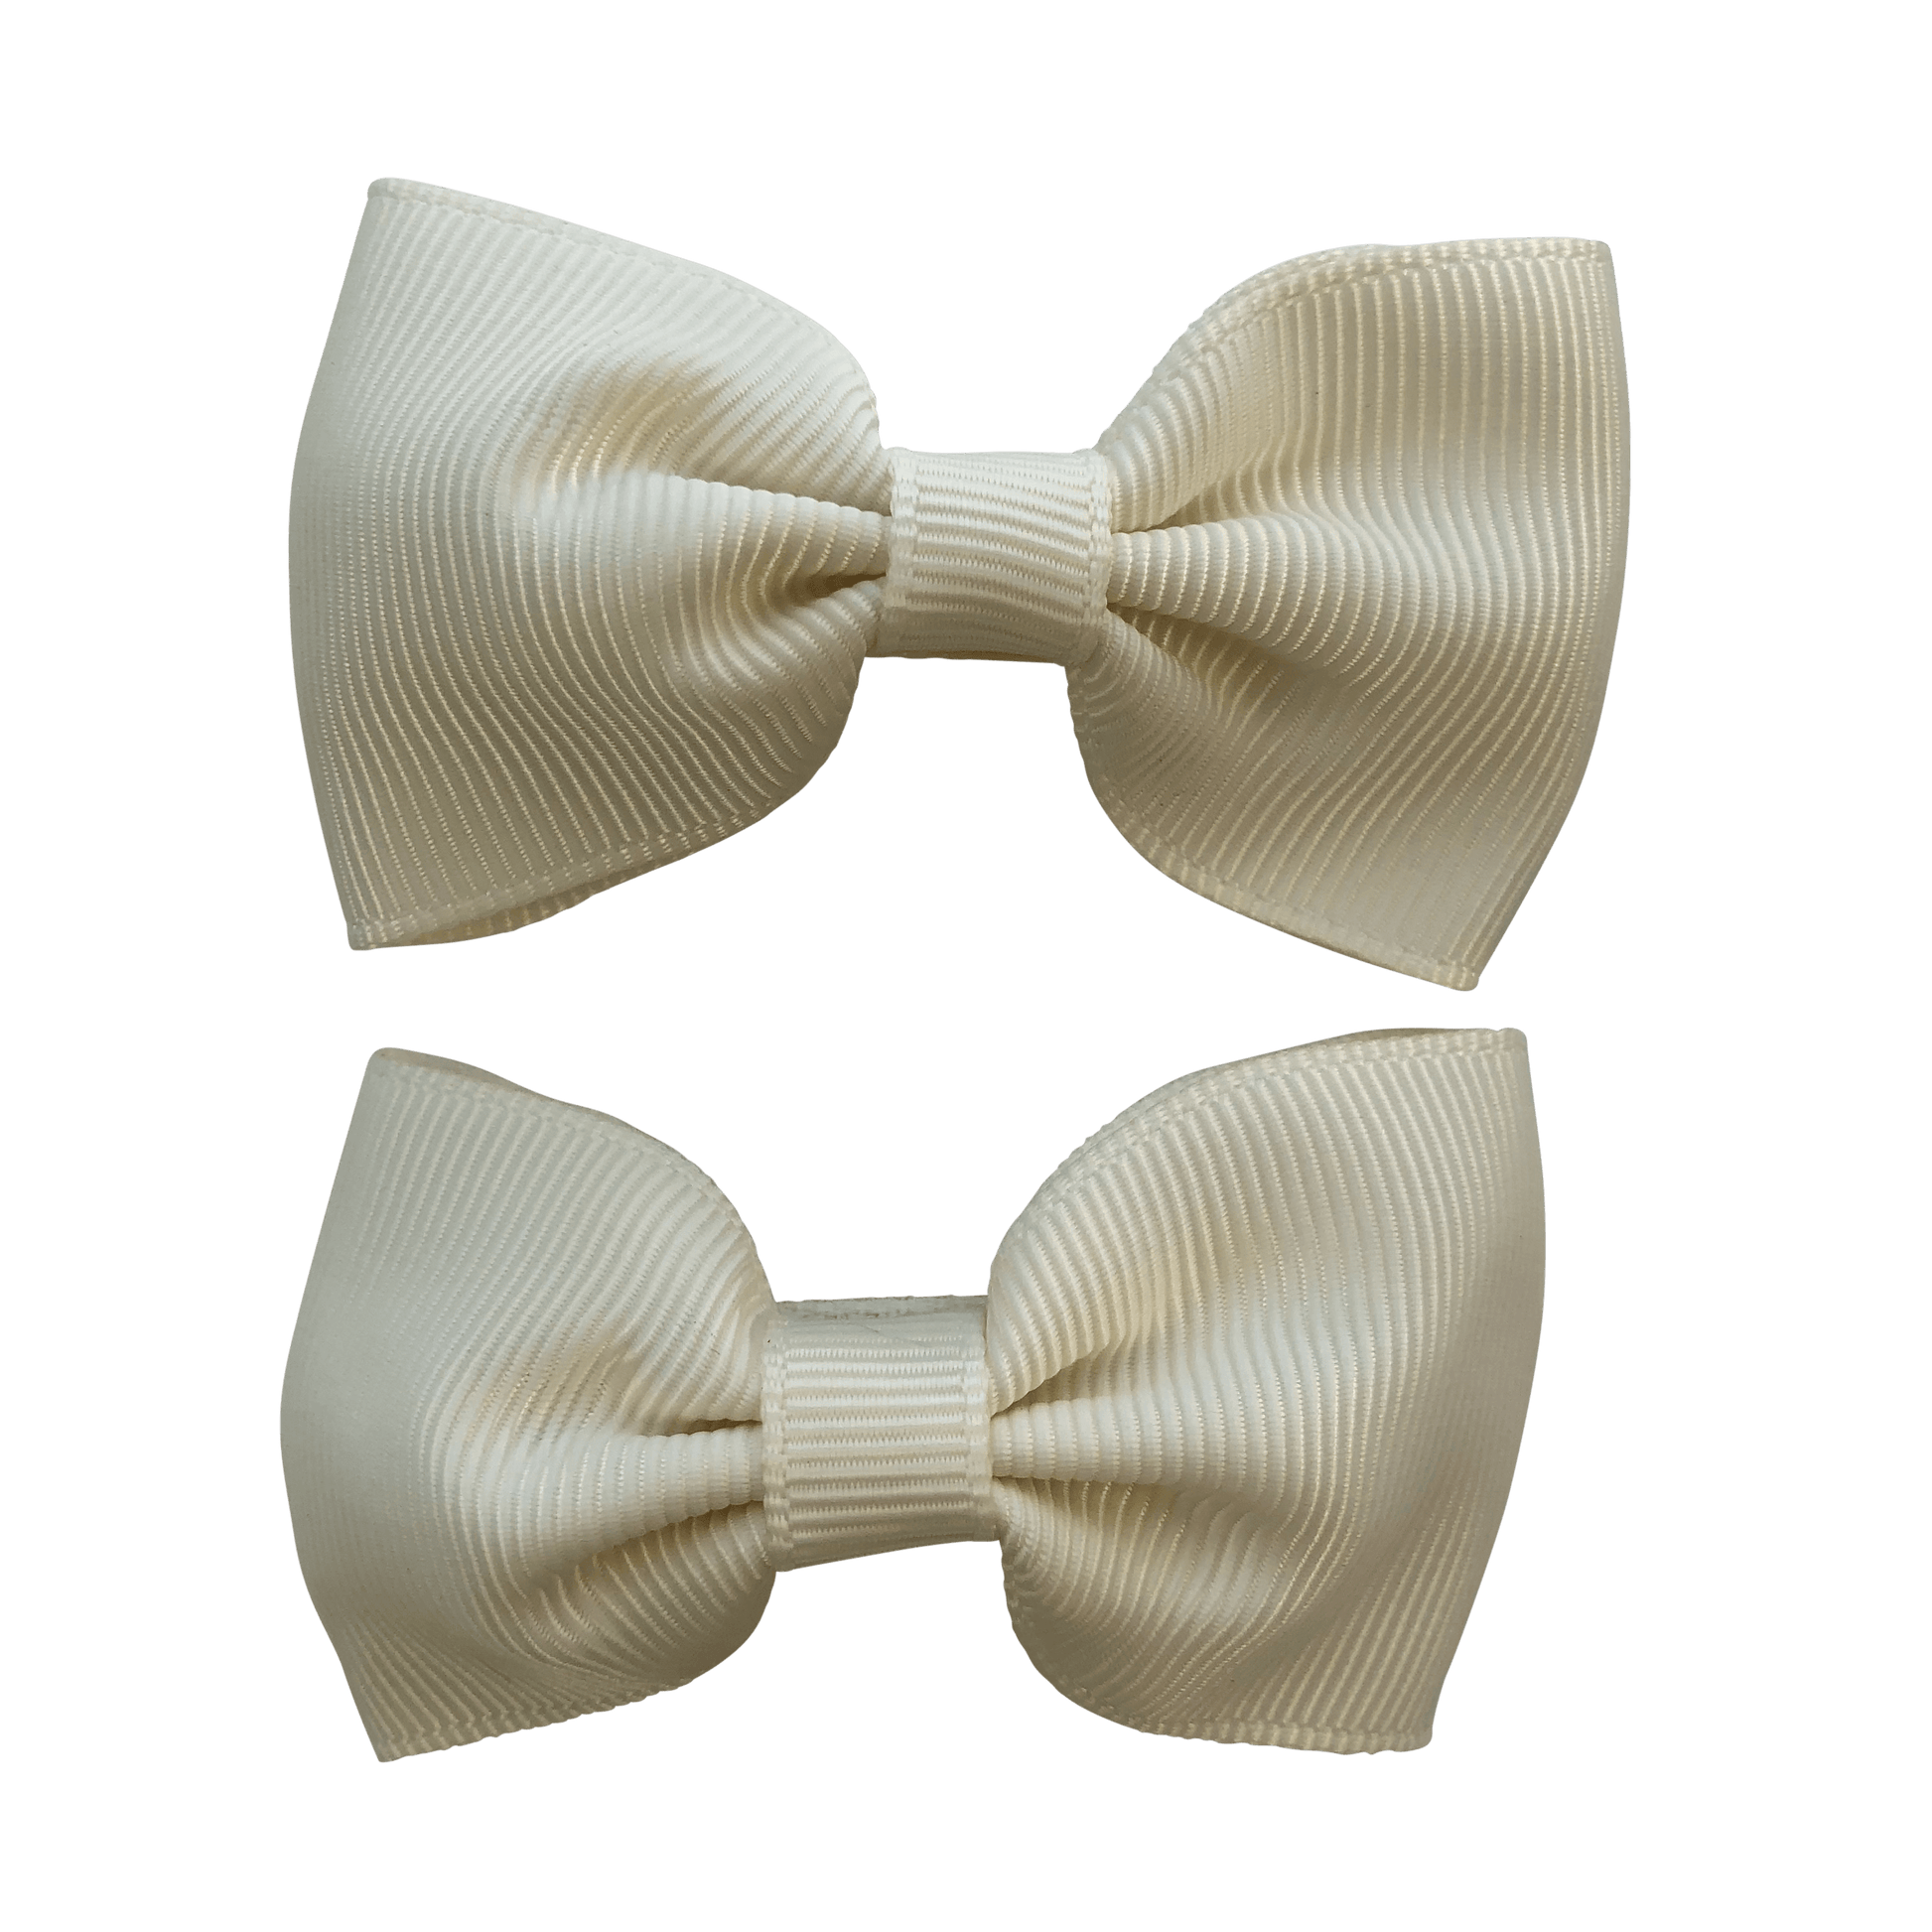 Ivory / Cream Hair Accessories - Assorted Hair Accessories - School Uniform Hair Accessories - Ponytails and Fairytales